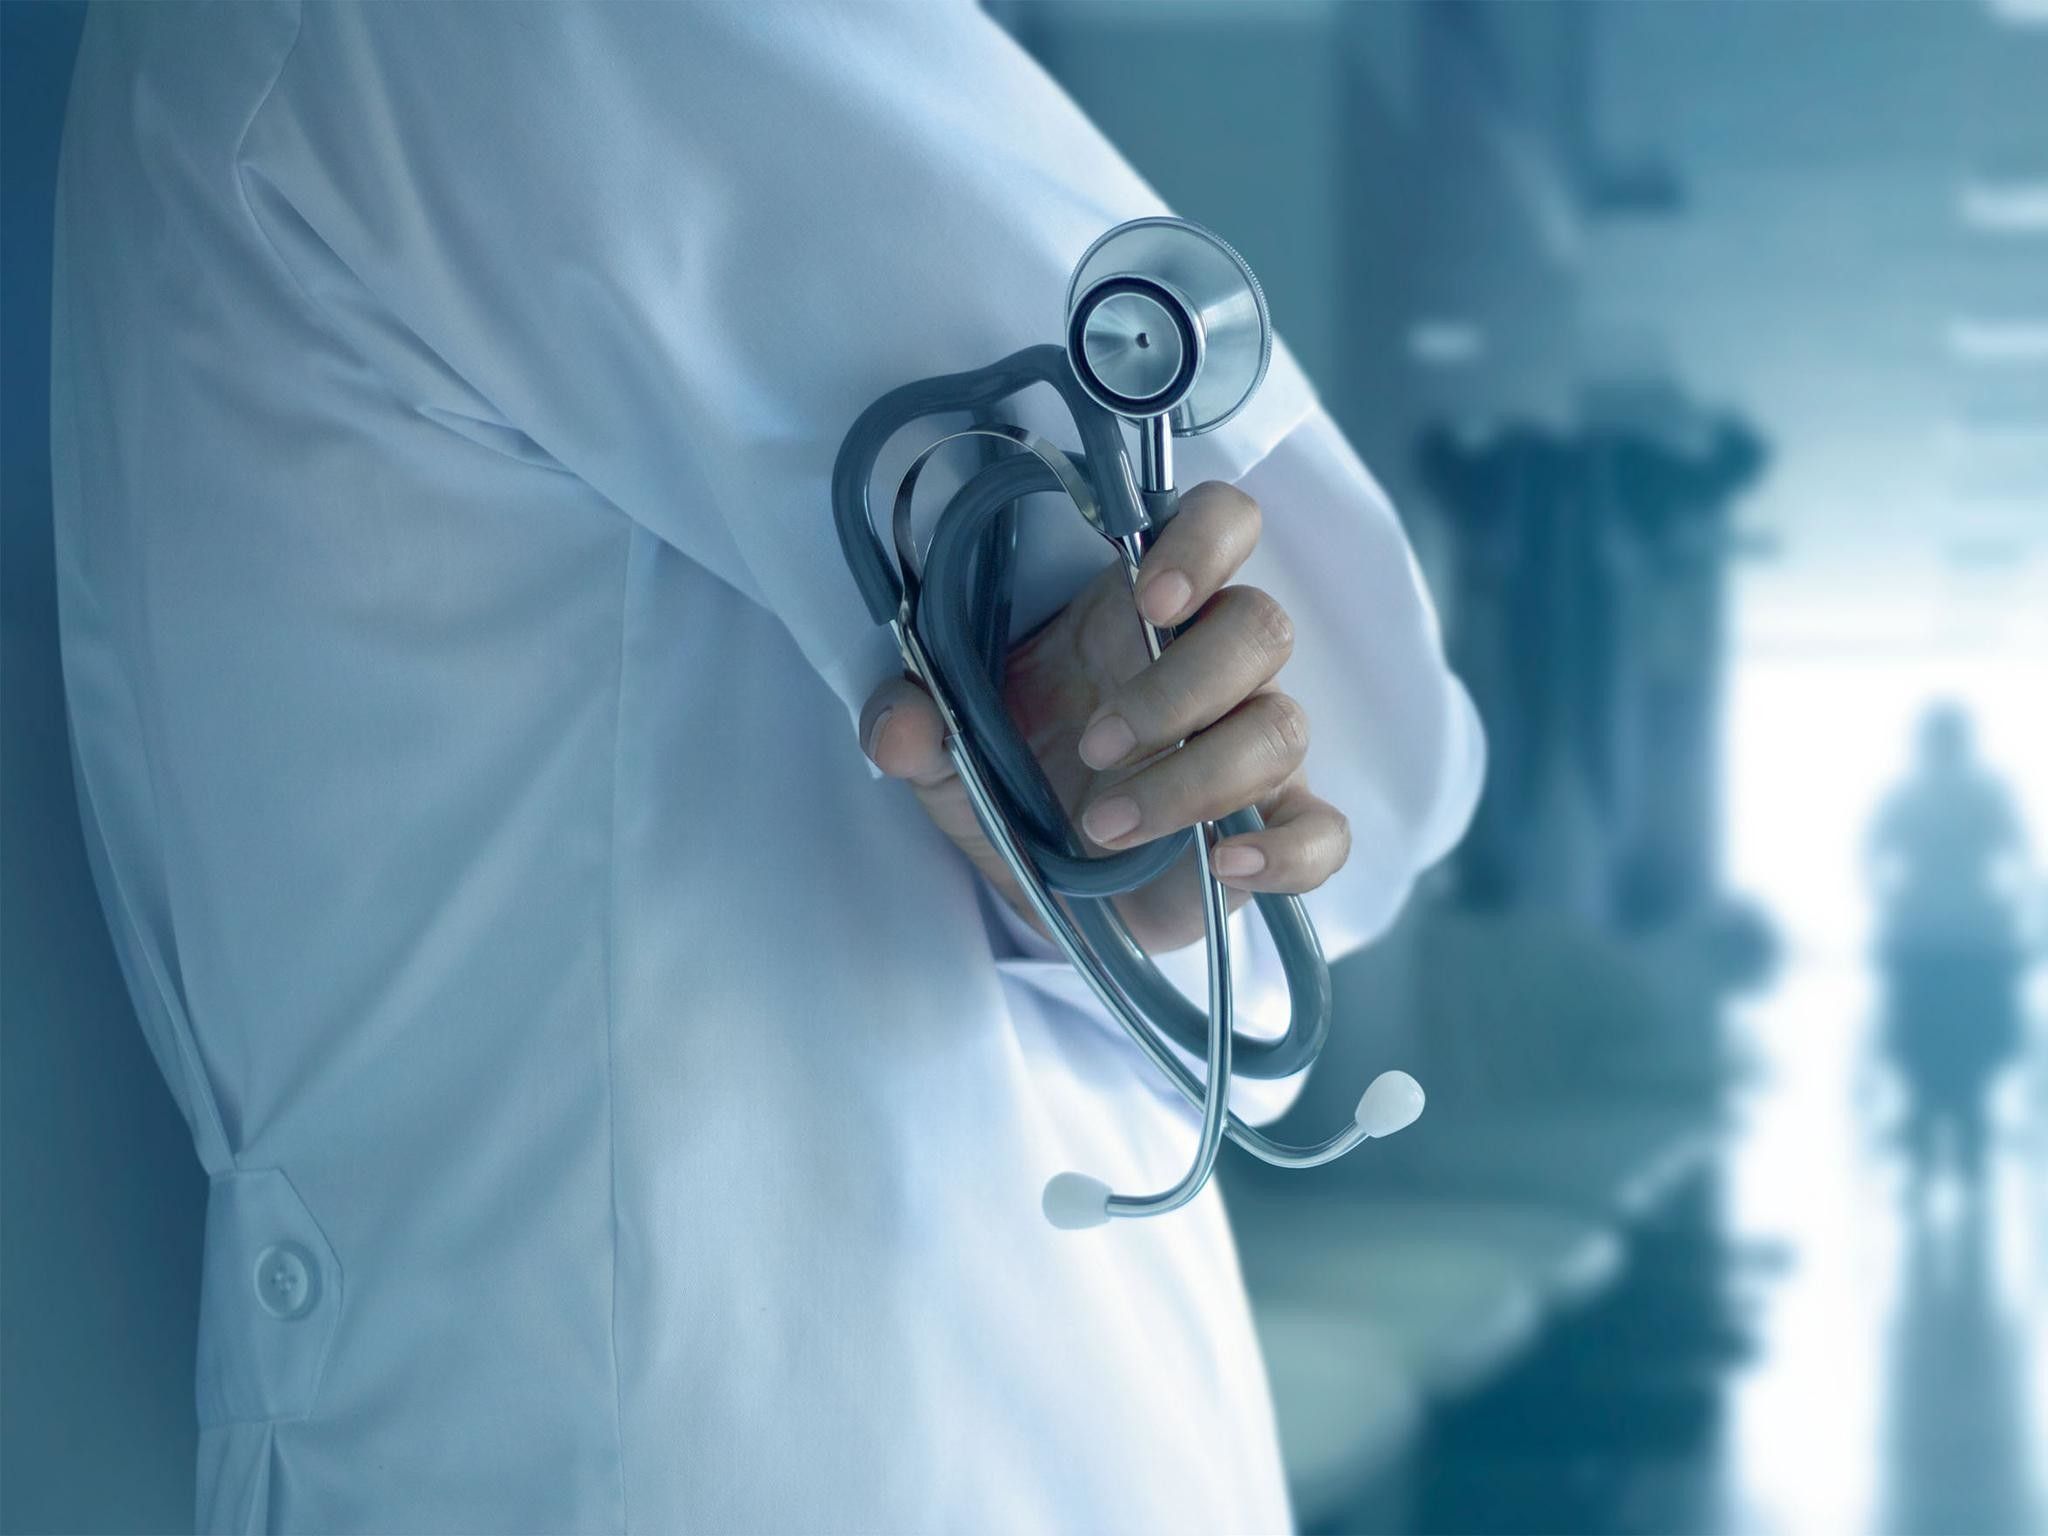 Medical Doctor Wallpapers